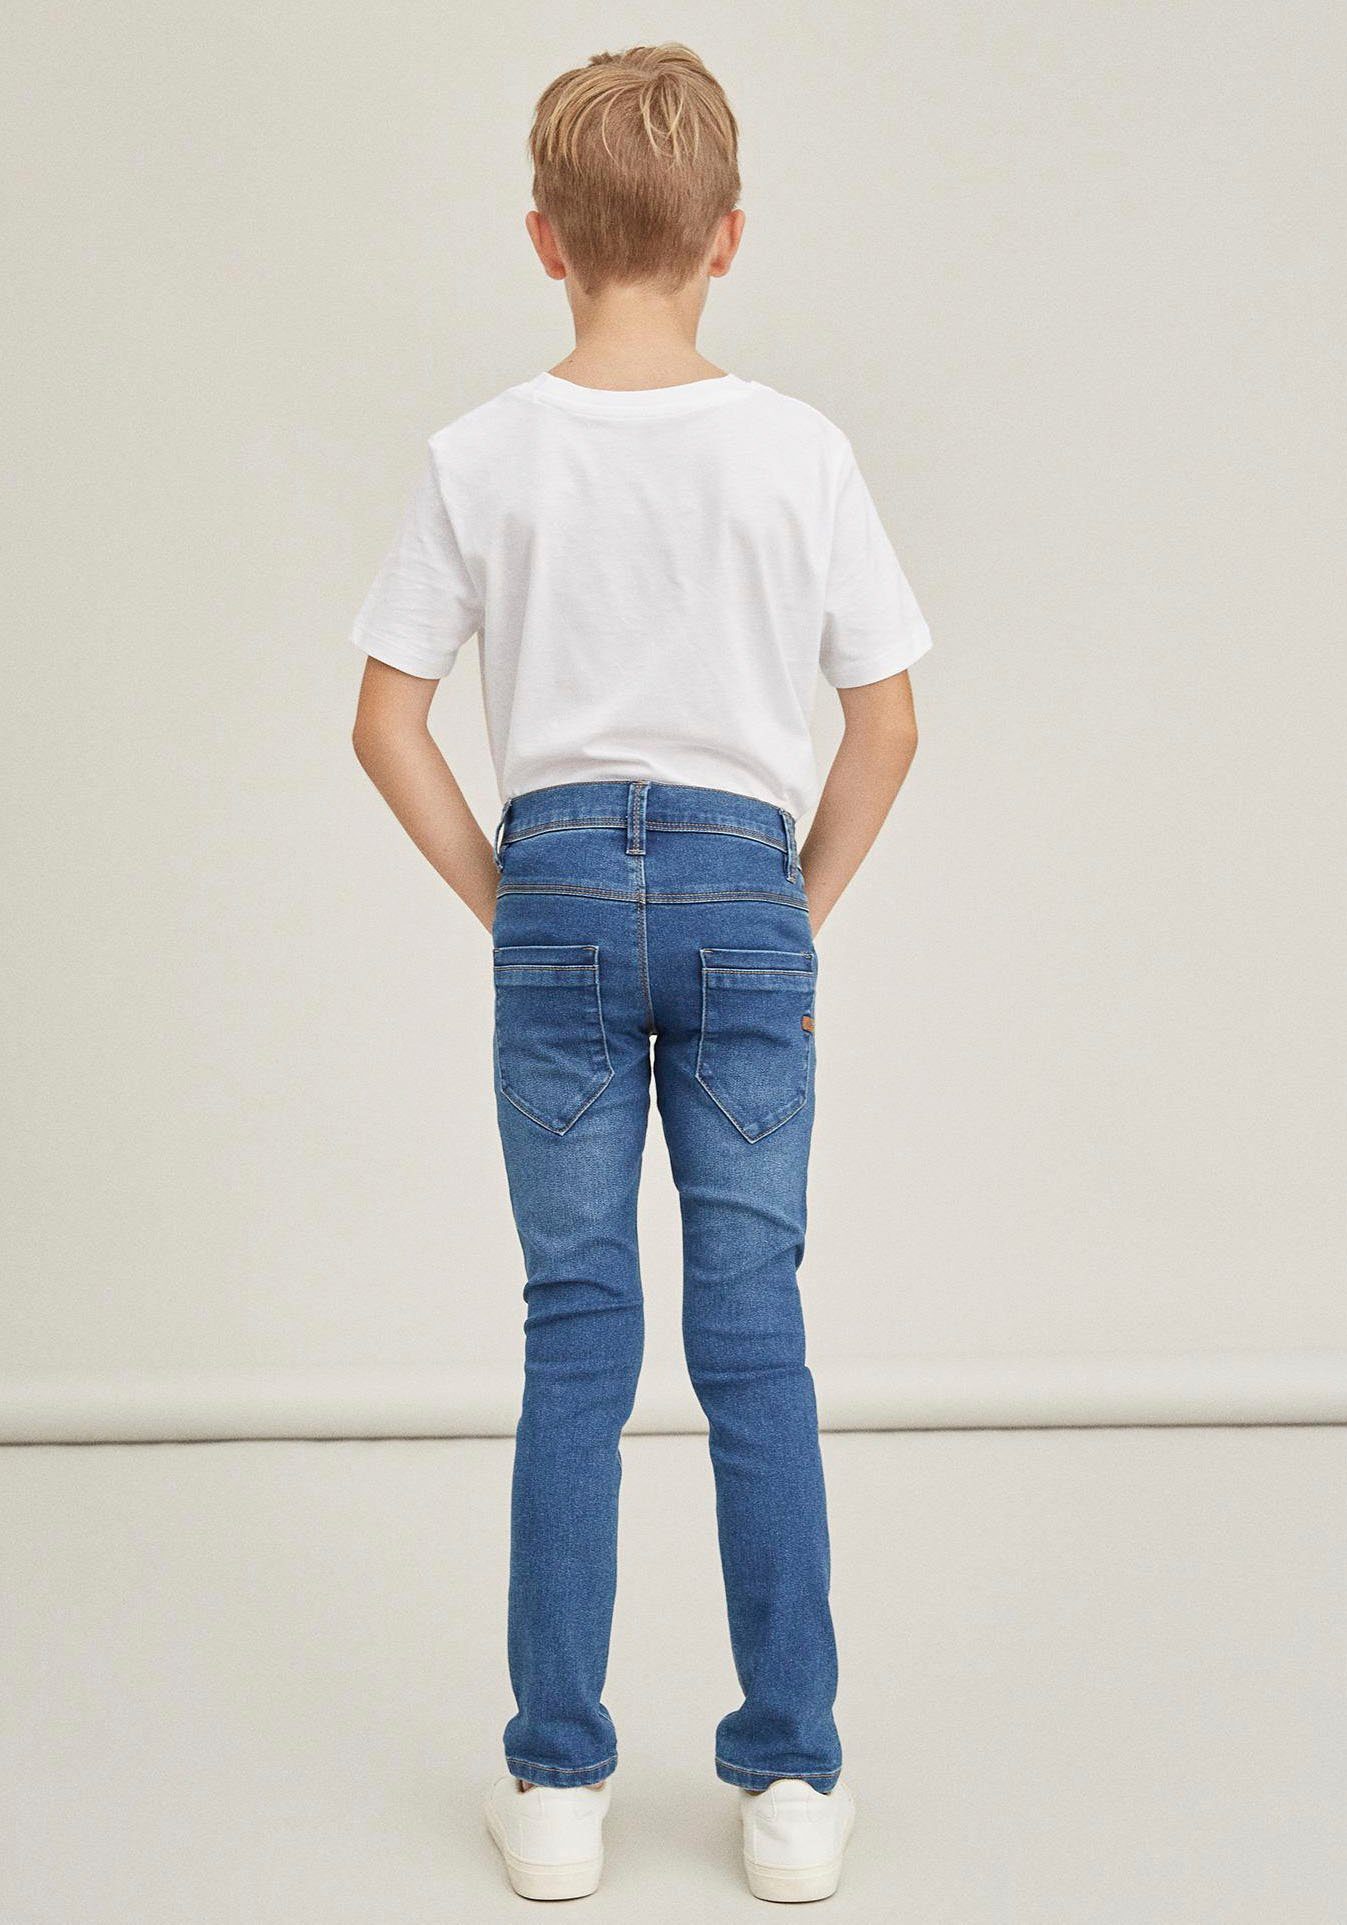 PANT NKMSILAS Name DNMTAX Blau It Stretch-Jeans